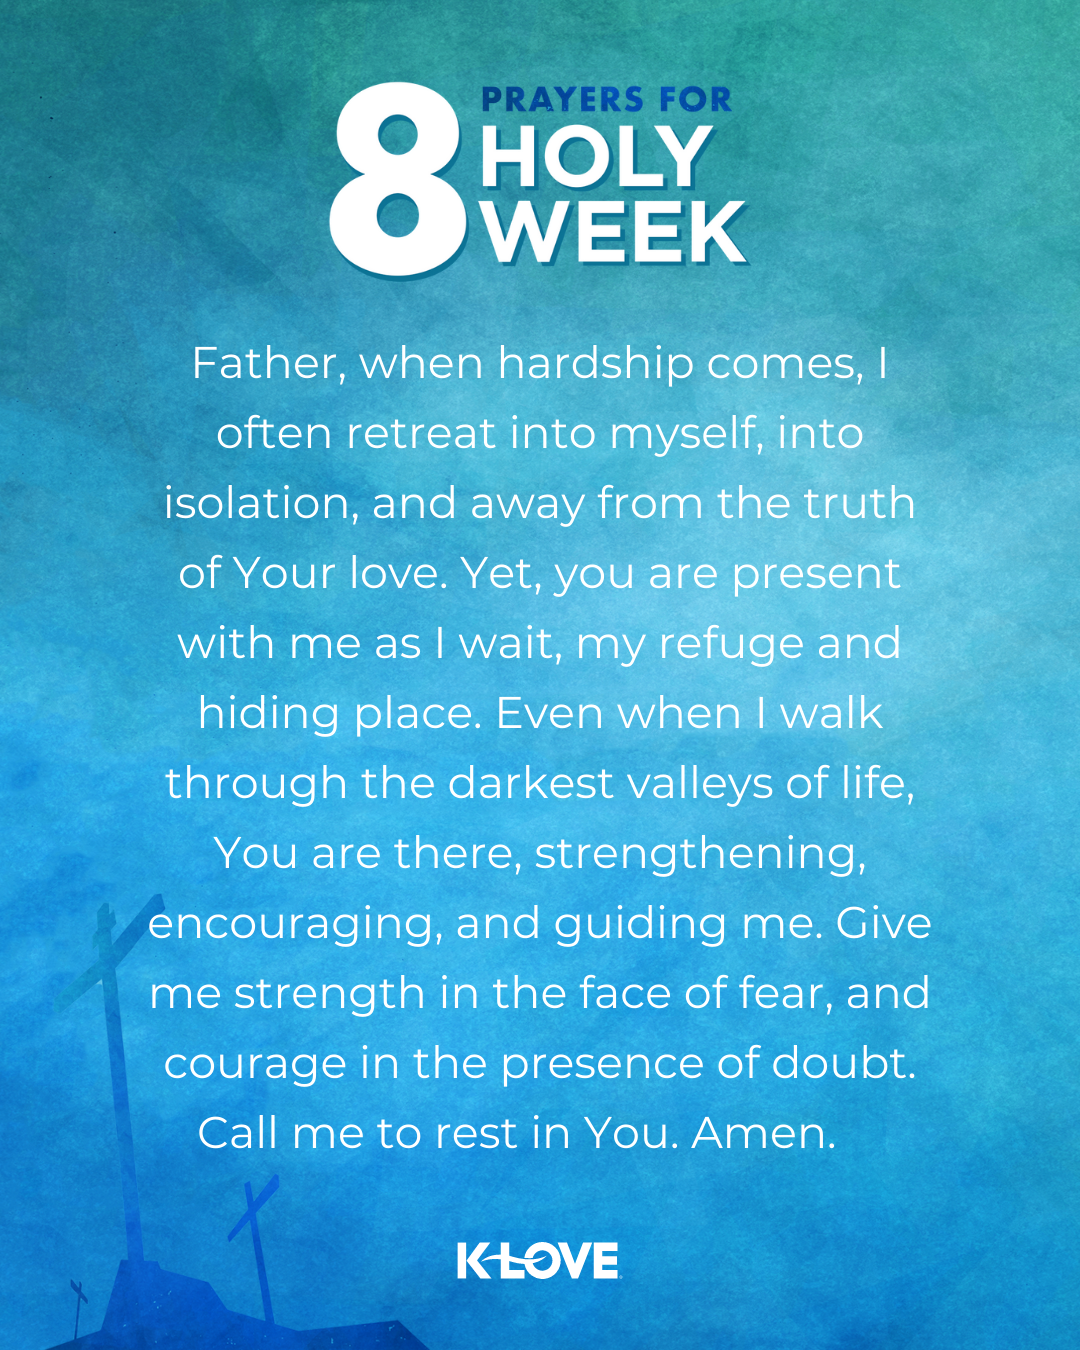 Father, when hardship comes, I often retreat into myself, into isolation, and away from the truth of Your love. Yet, you are present with me as I wait, my refuge and hiding place. Even when I walk through the darkest valleys of life, You are there, strengthening, encouraging, and guiding me. Give me strength in the face of fear, courage in the presence of doubt. Call me to rest in You. Amen. 